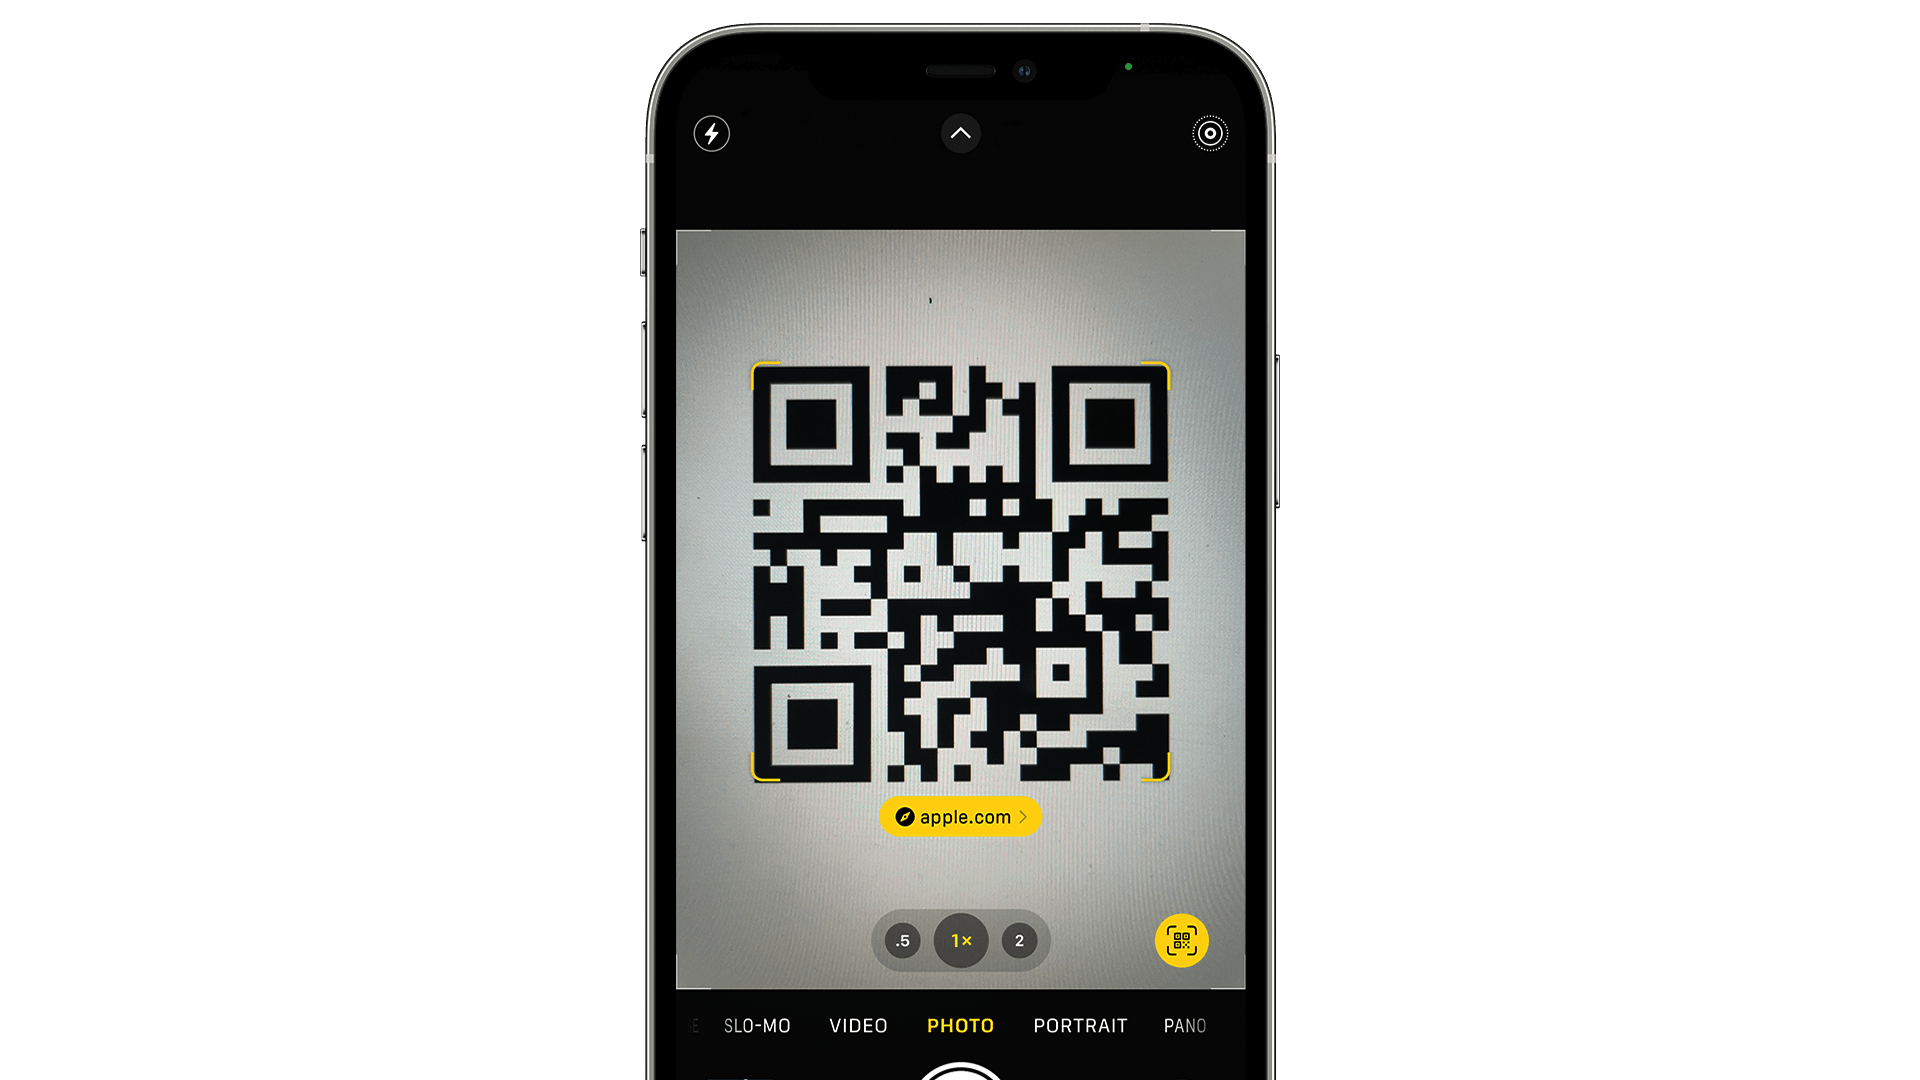 Scanning a QR code with the iPhone's camera.